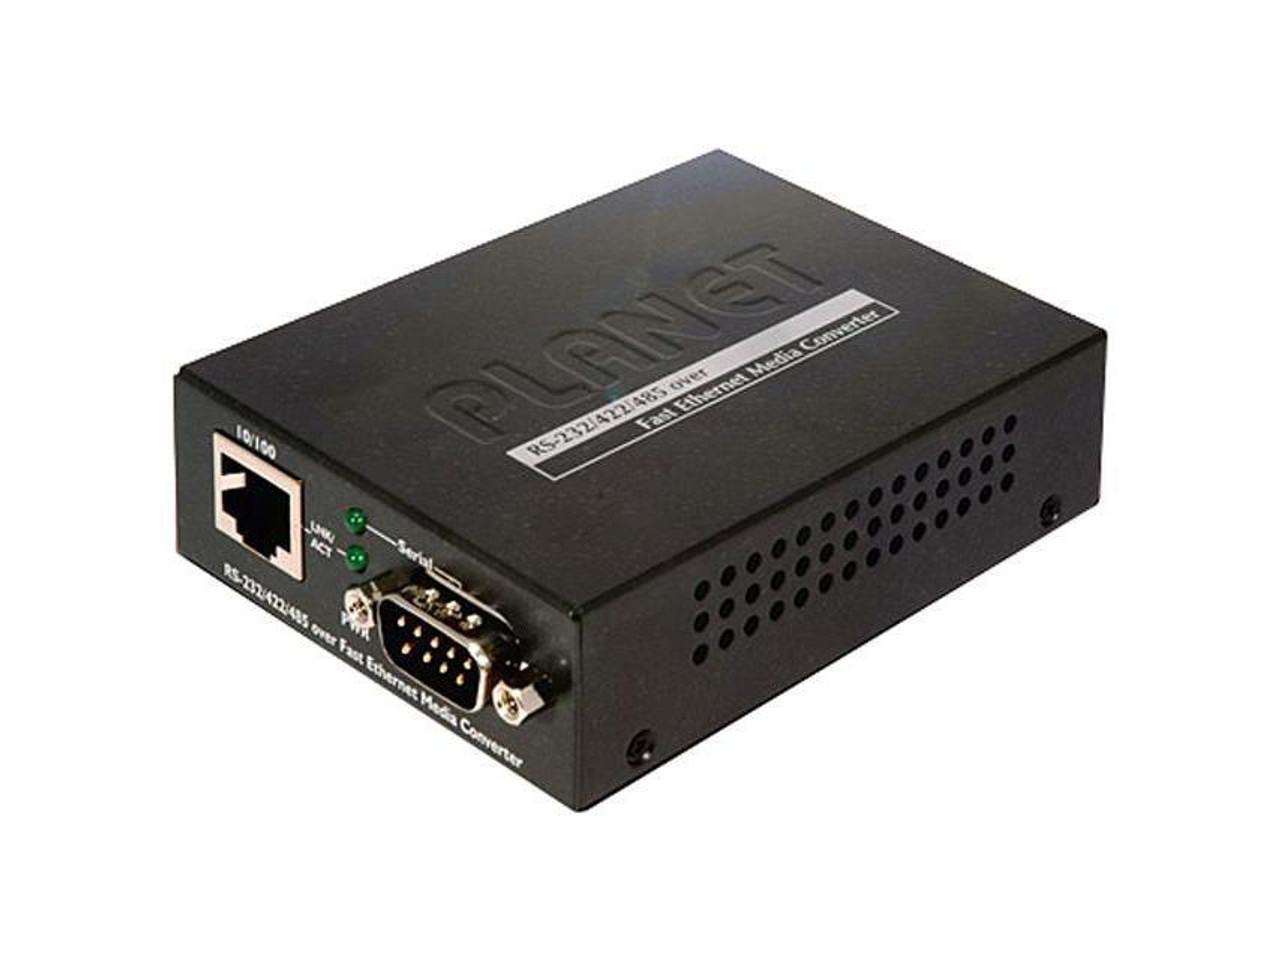 ICS-100 Planet Technology RS232/RS-422/RS485 to Ethernet (TP) Converter